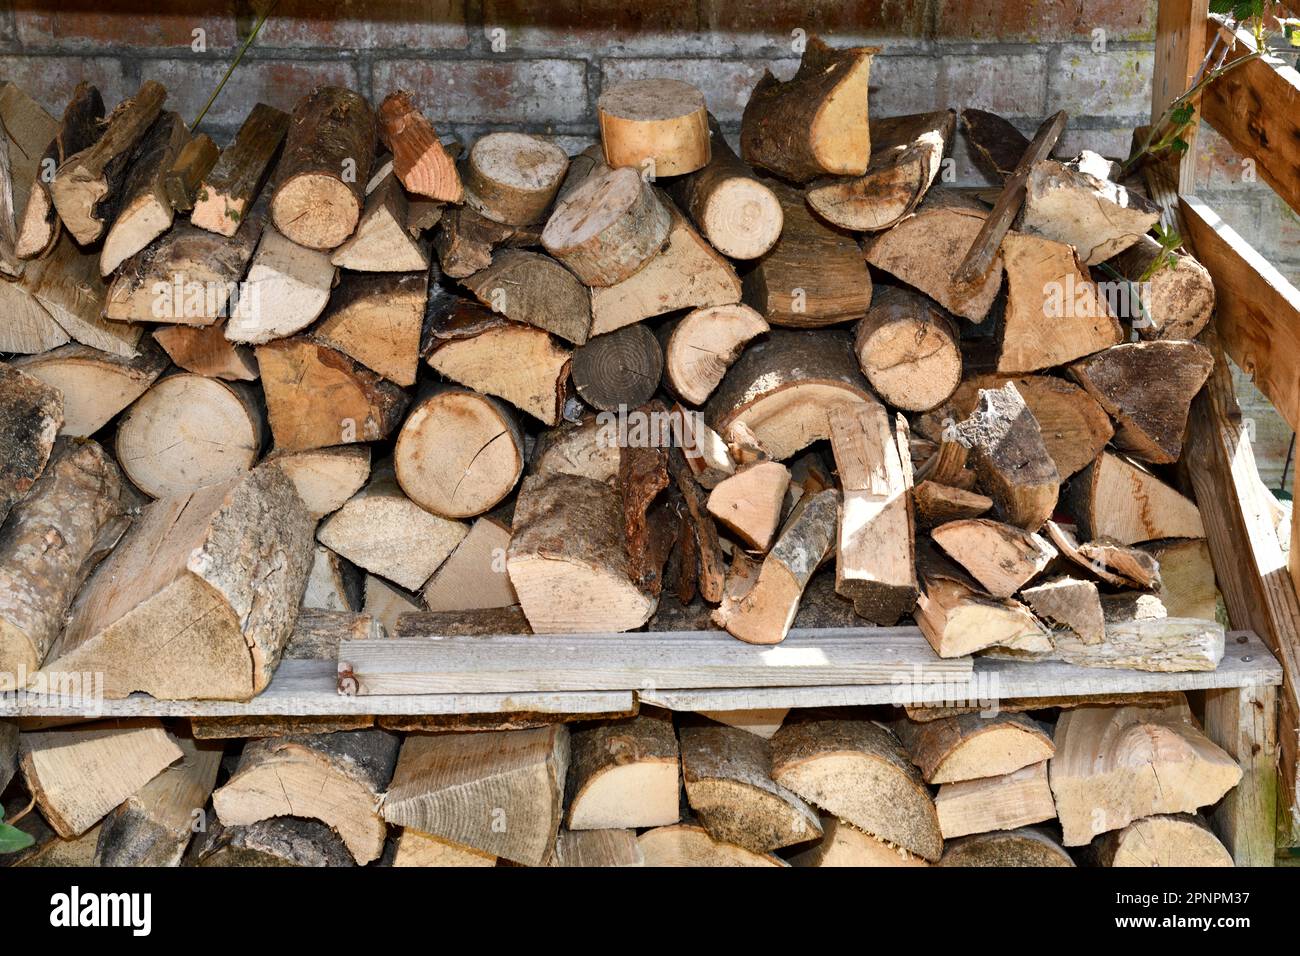 Log Bunker made from Wooden Pallets. Stock Photo